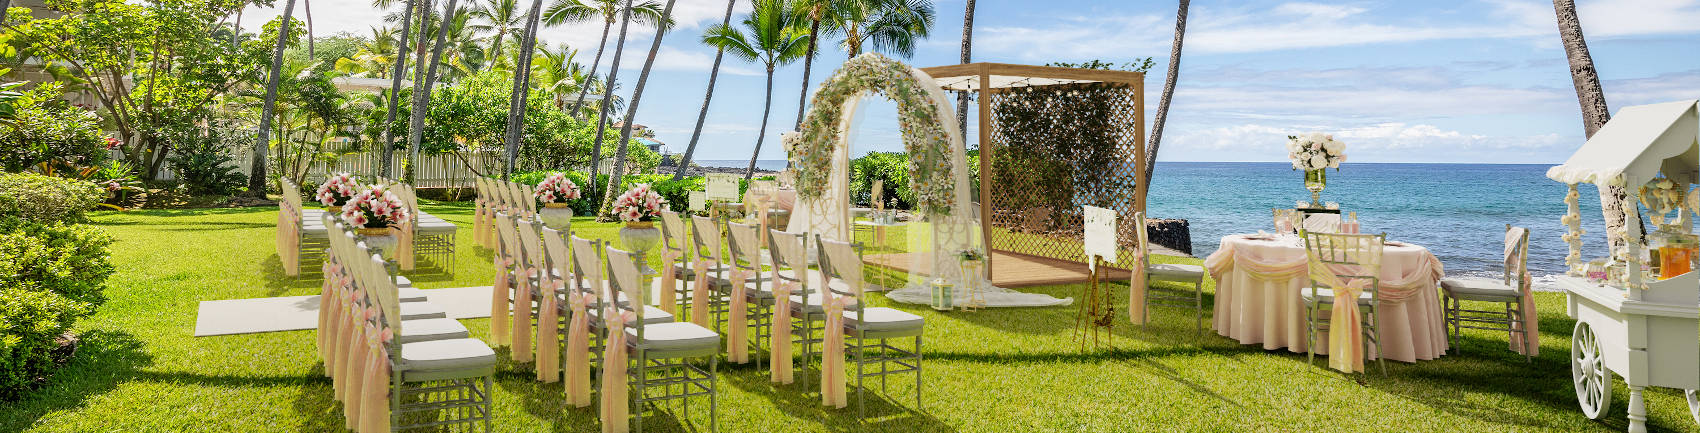 Wedding set up on the lawn with flowers lining the aisle and a flower adorned archway 